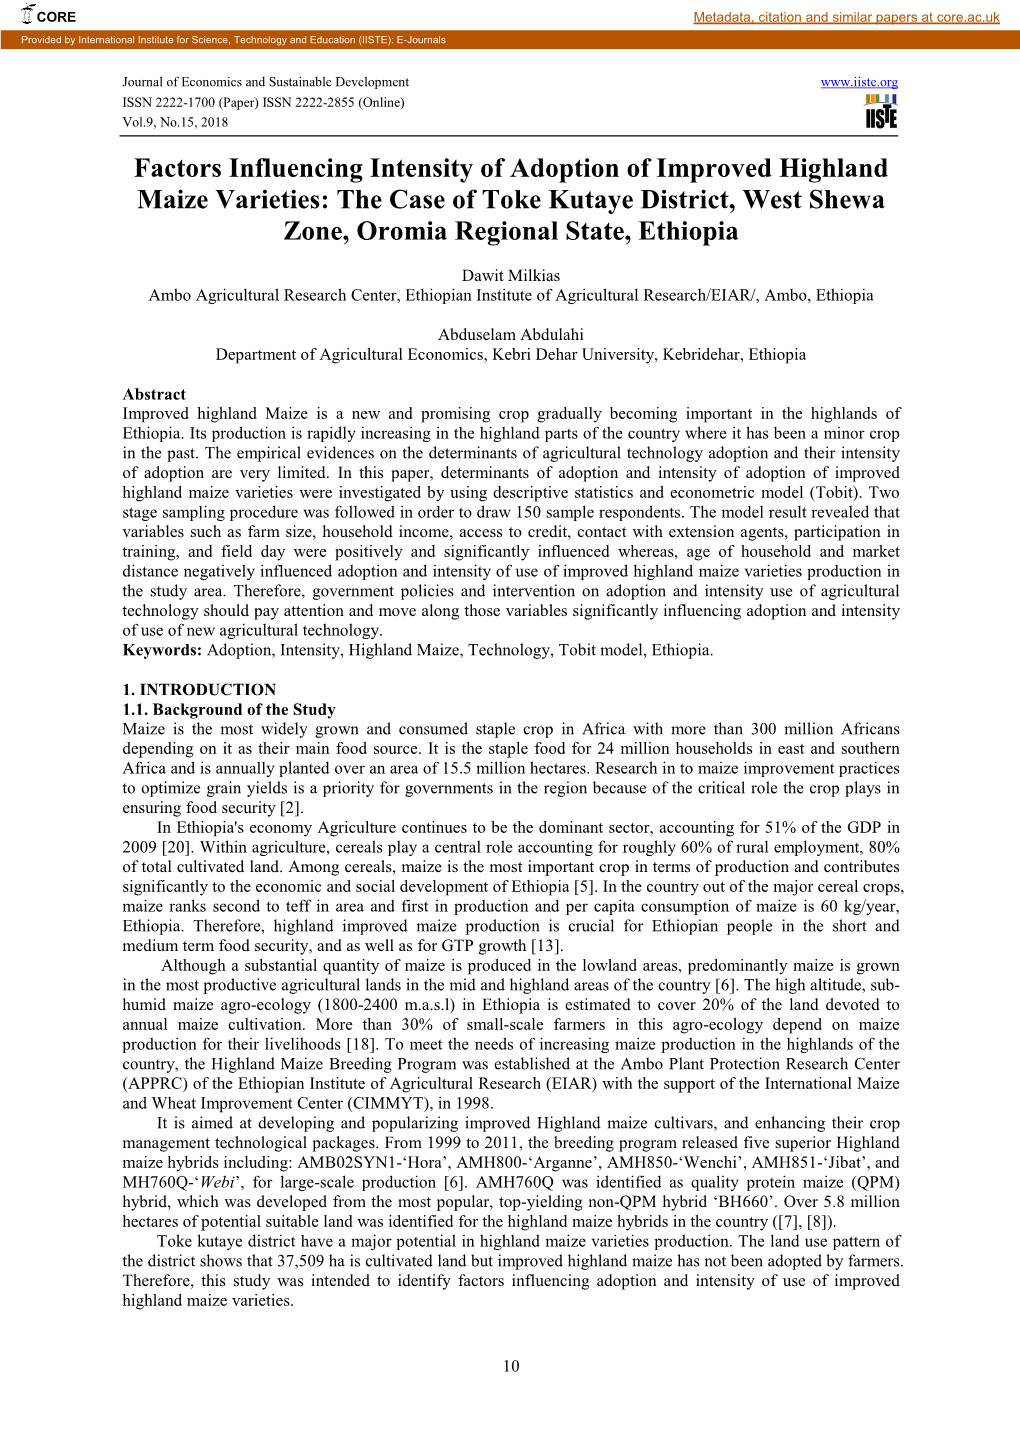 Factors Influencing Intensity of Adoption of Improved Highland Maize Varieties: the Case of Toke Kutaye District, West Shewa Zone, Oromia Regional State, Ethiopia